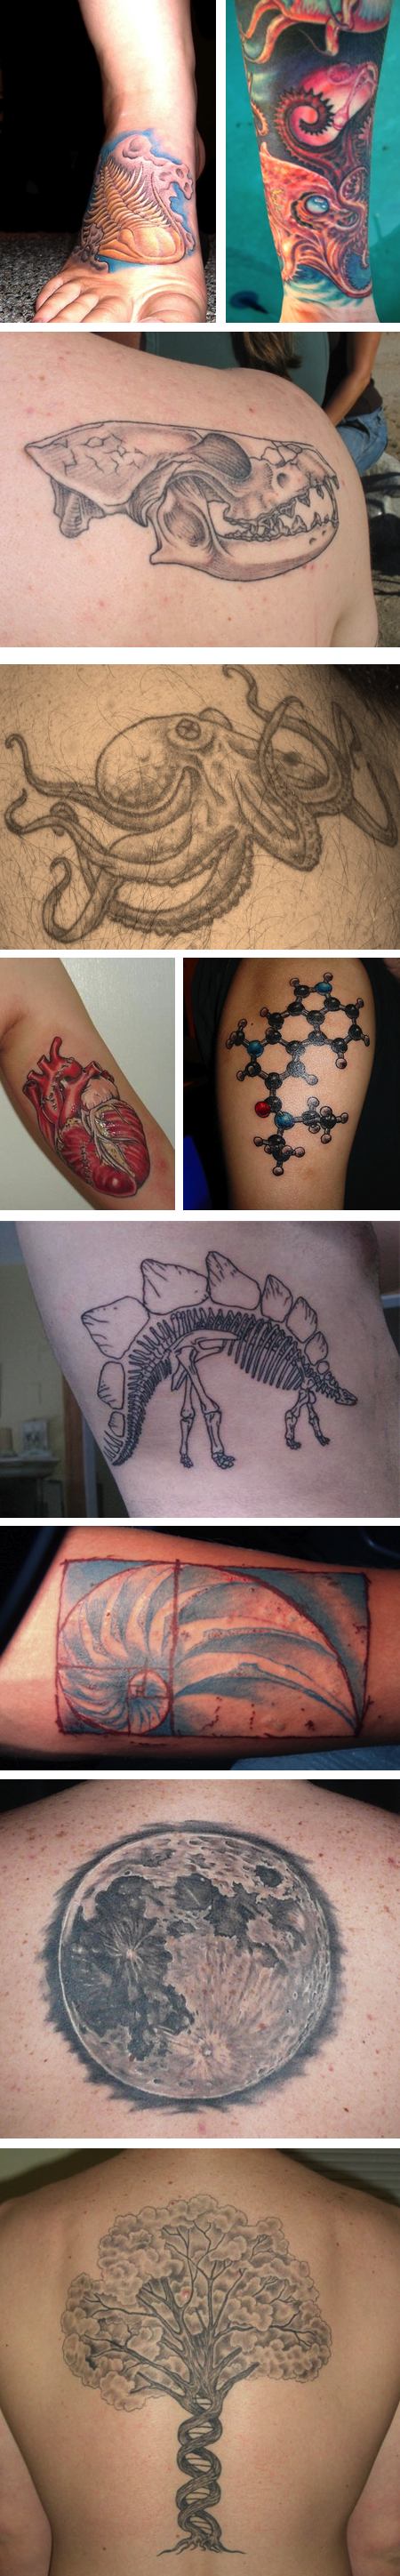 Science Ink: Tattoos of the Science Obsesssed, Carl Zimmer's Science Tattoo Emporium